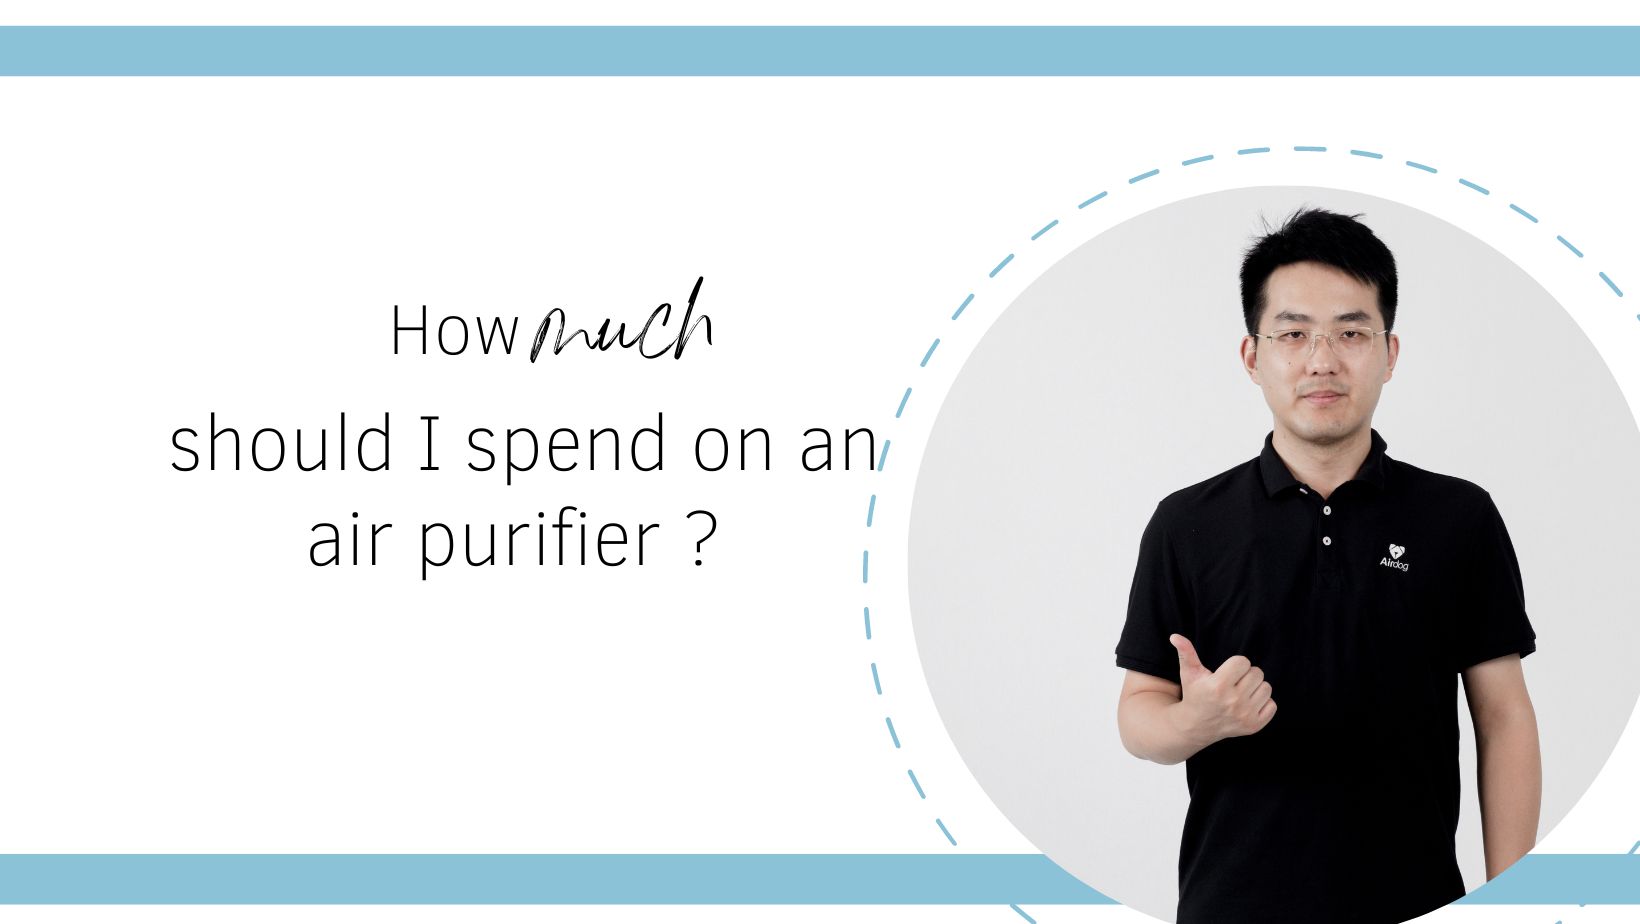 how much should i spend on air purifiers.jpg